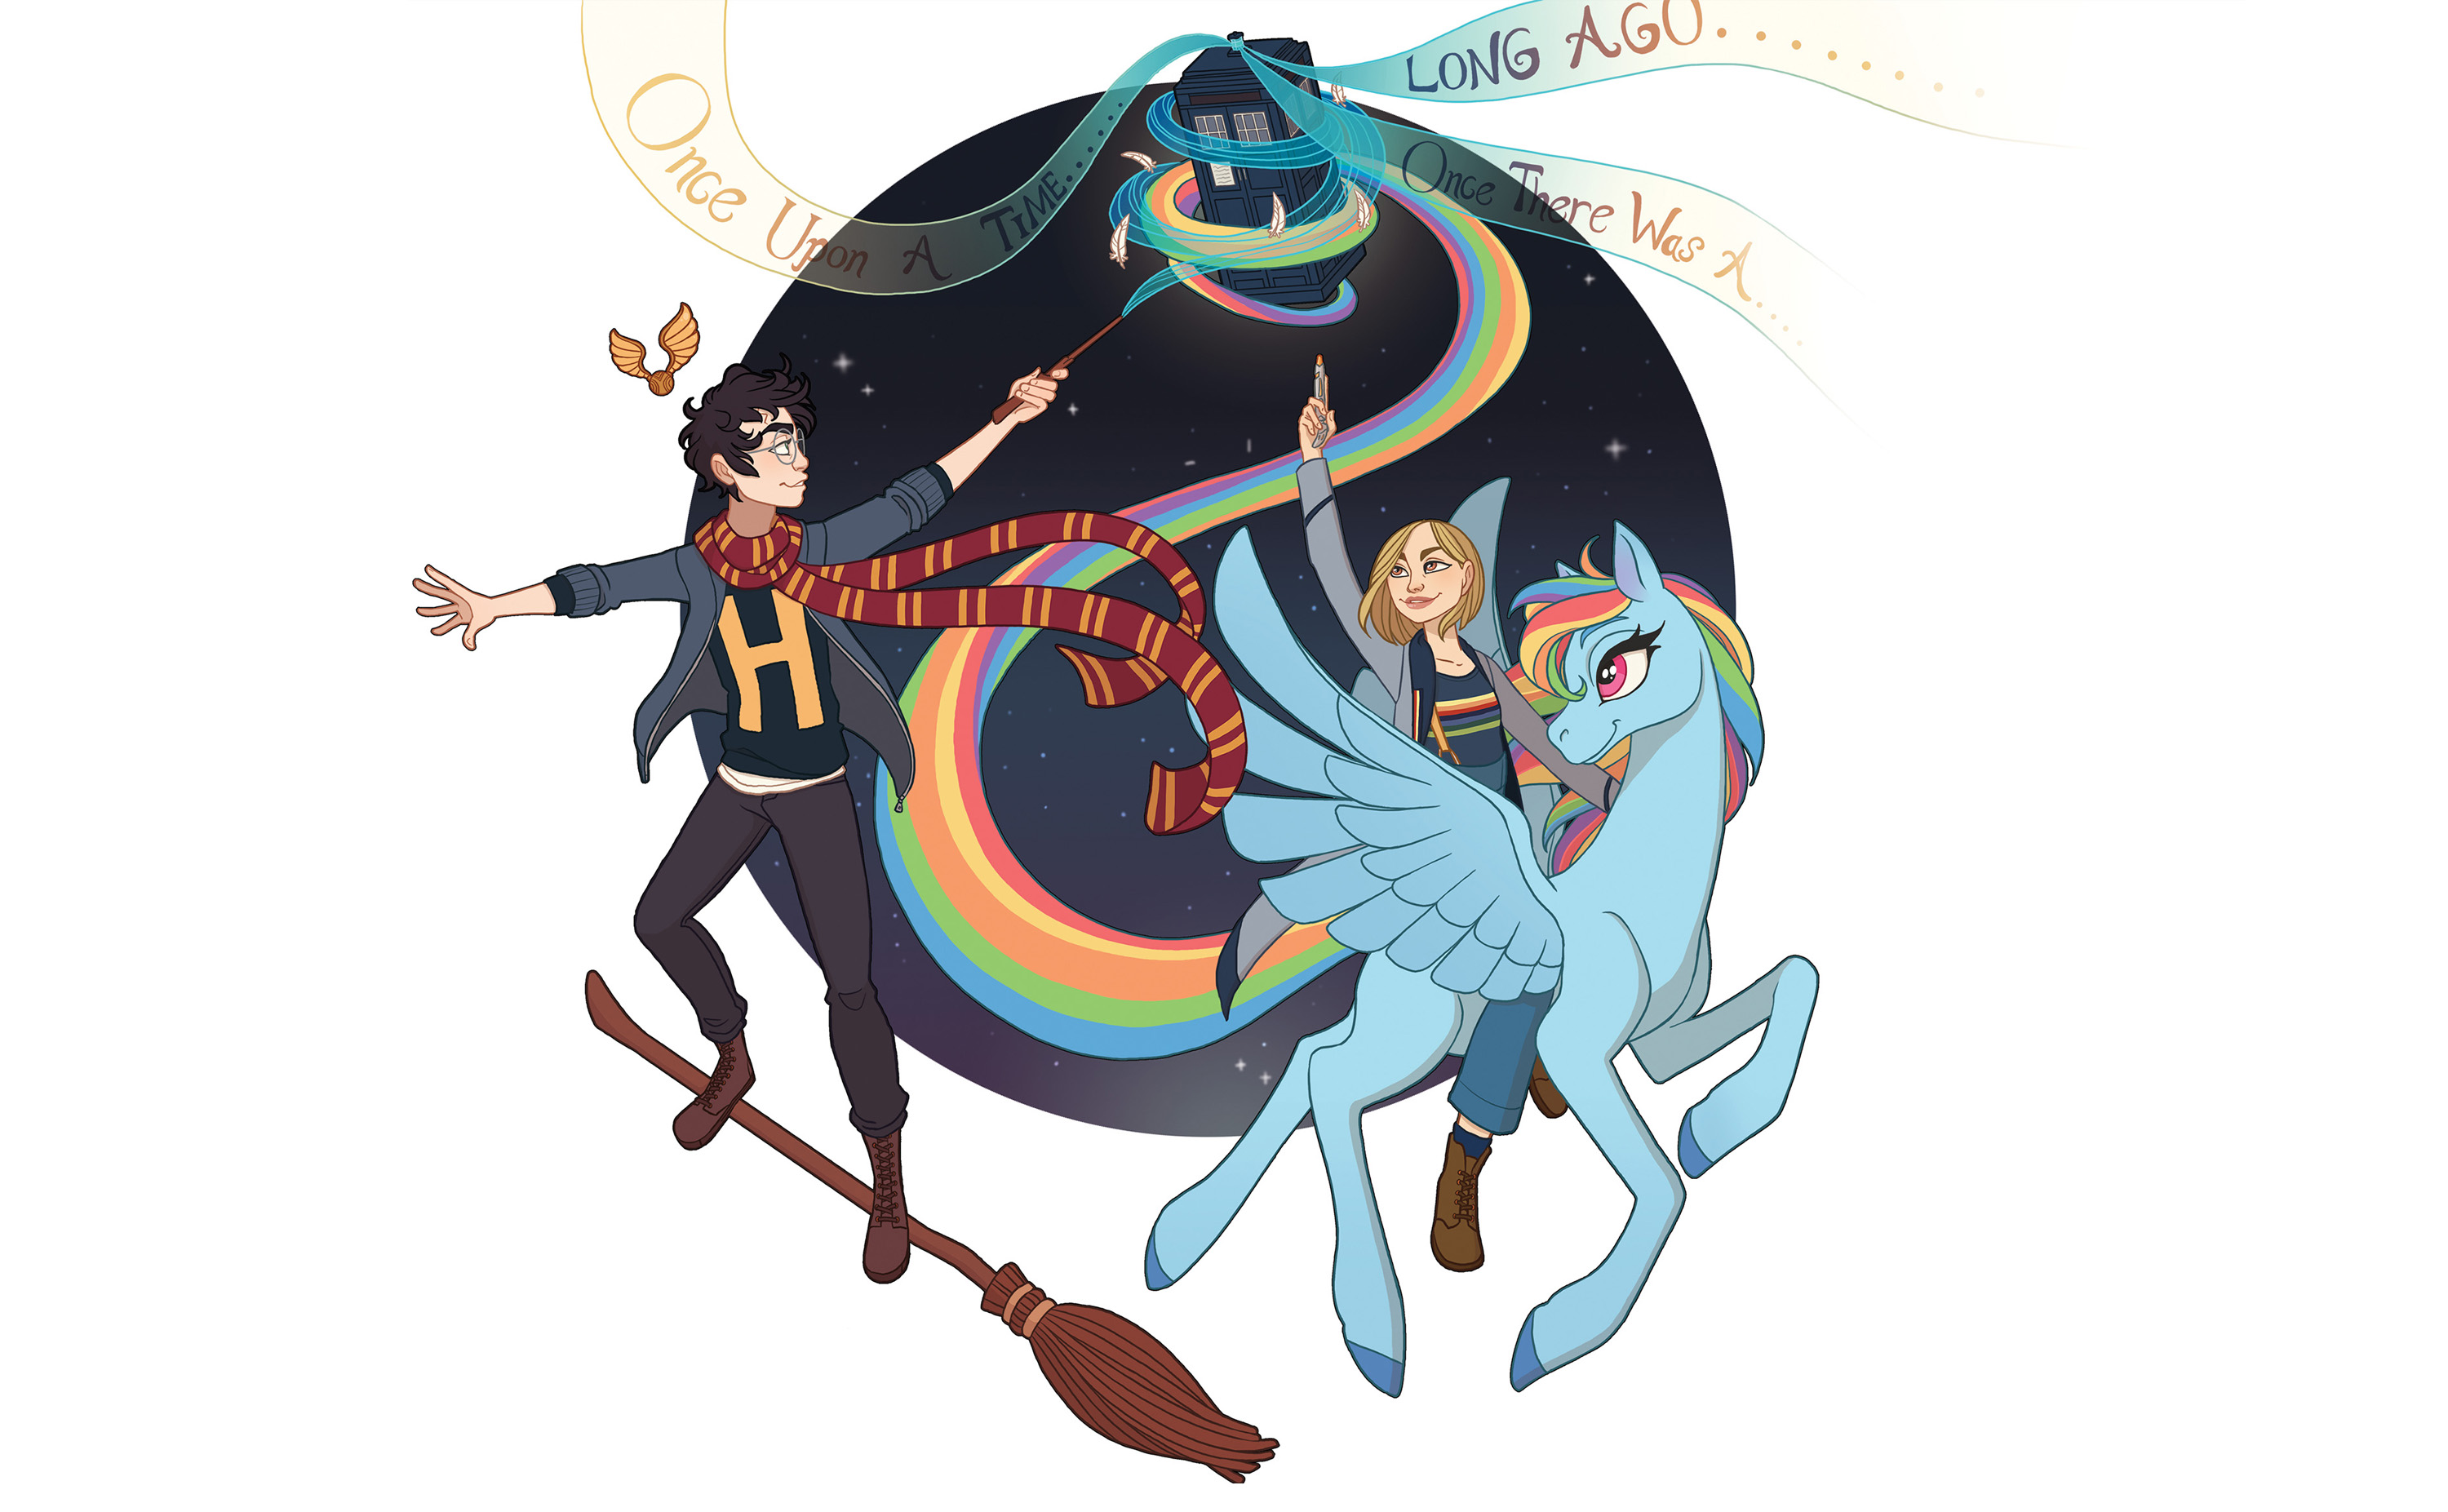 conceptual illustration of Harry Potter, Dr. Who and a rainbow My little pony all working together to float the tardis in the sky